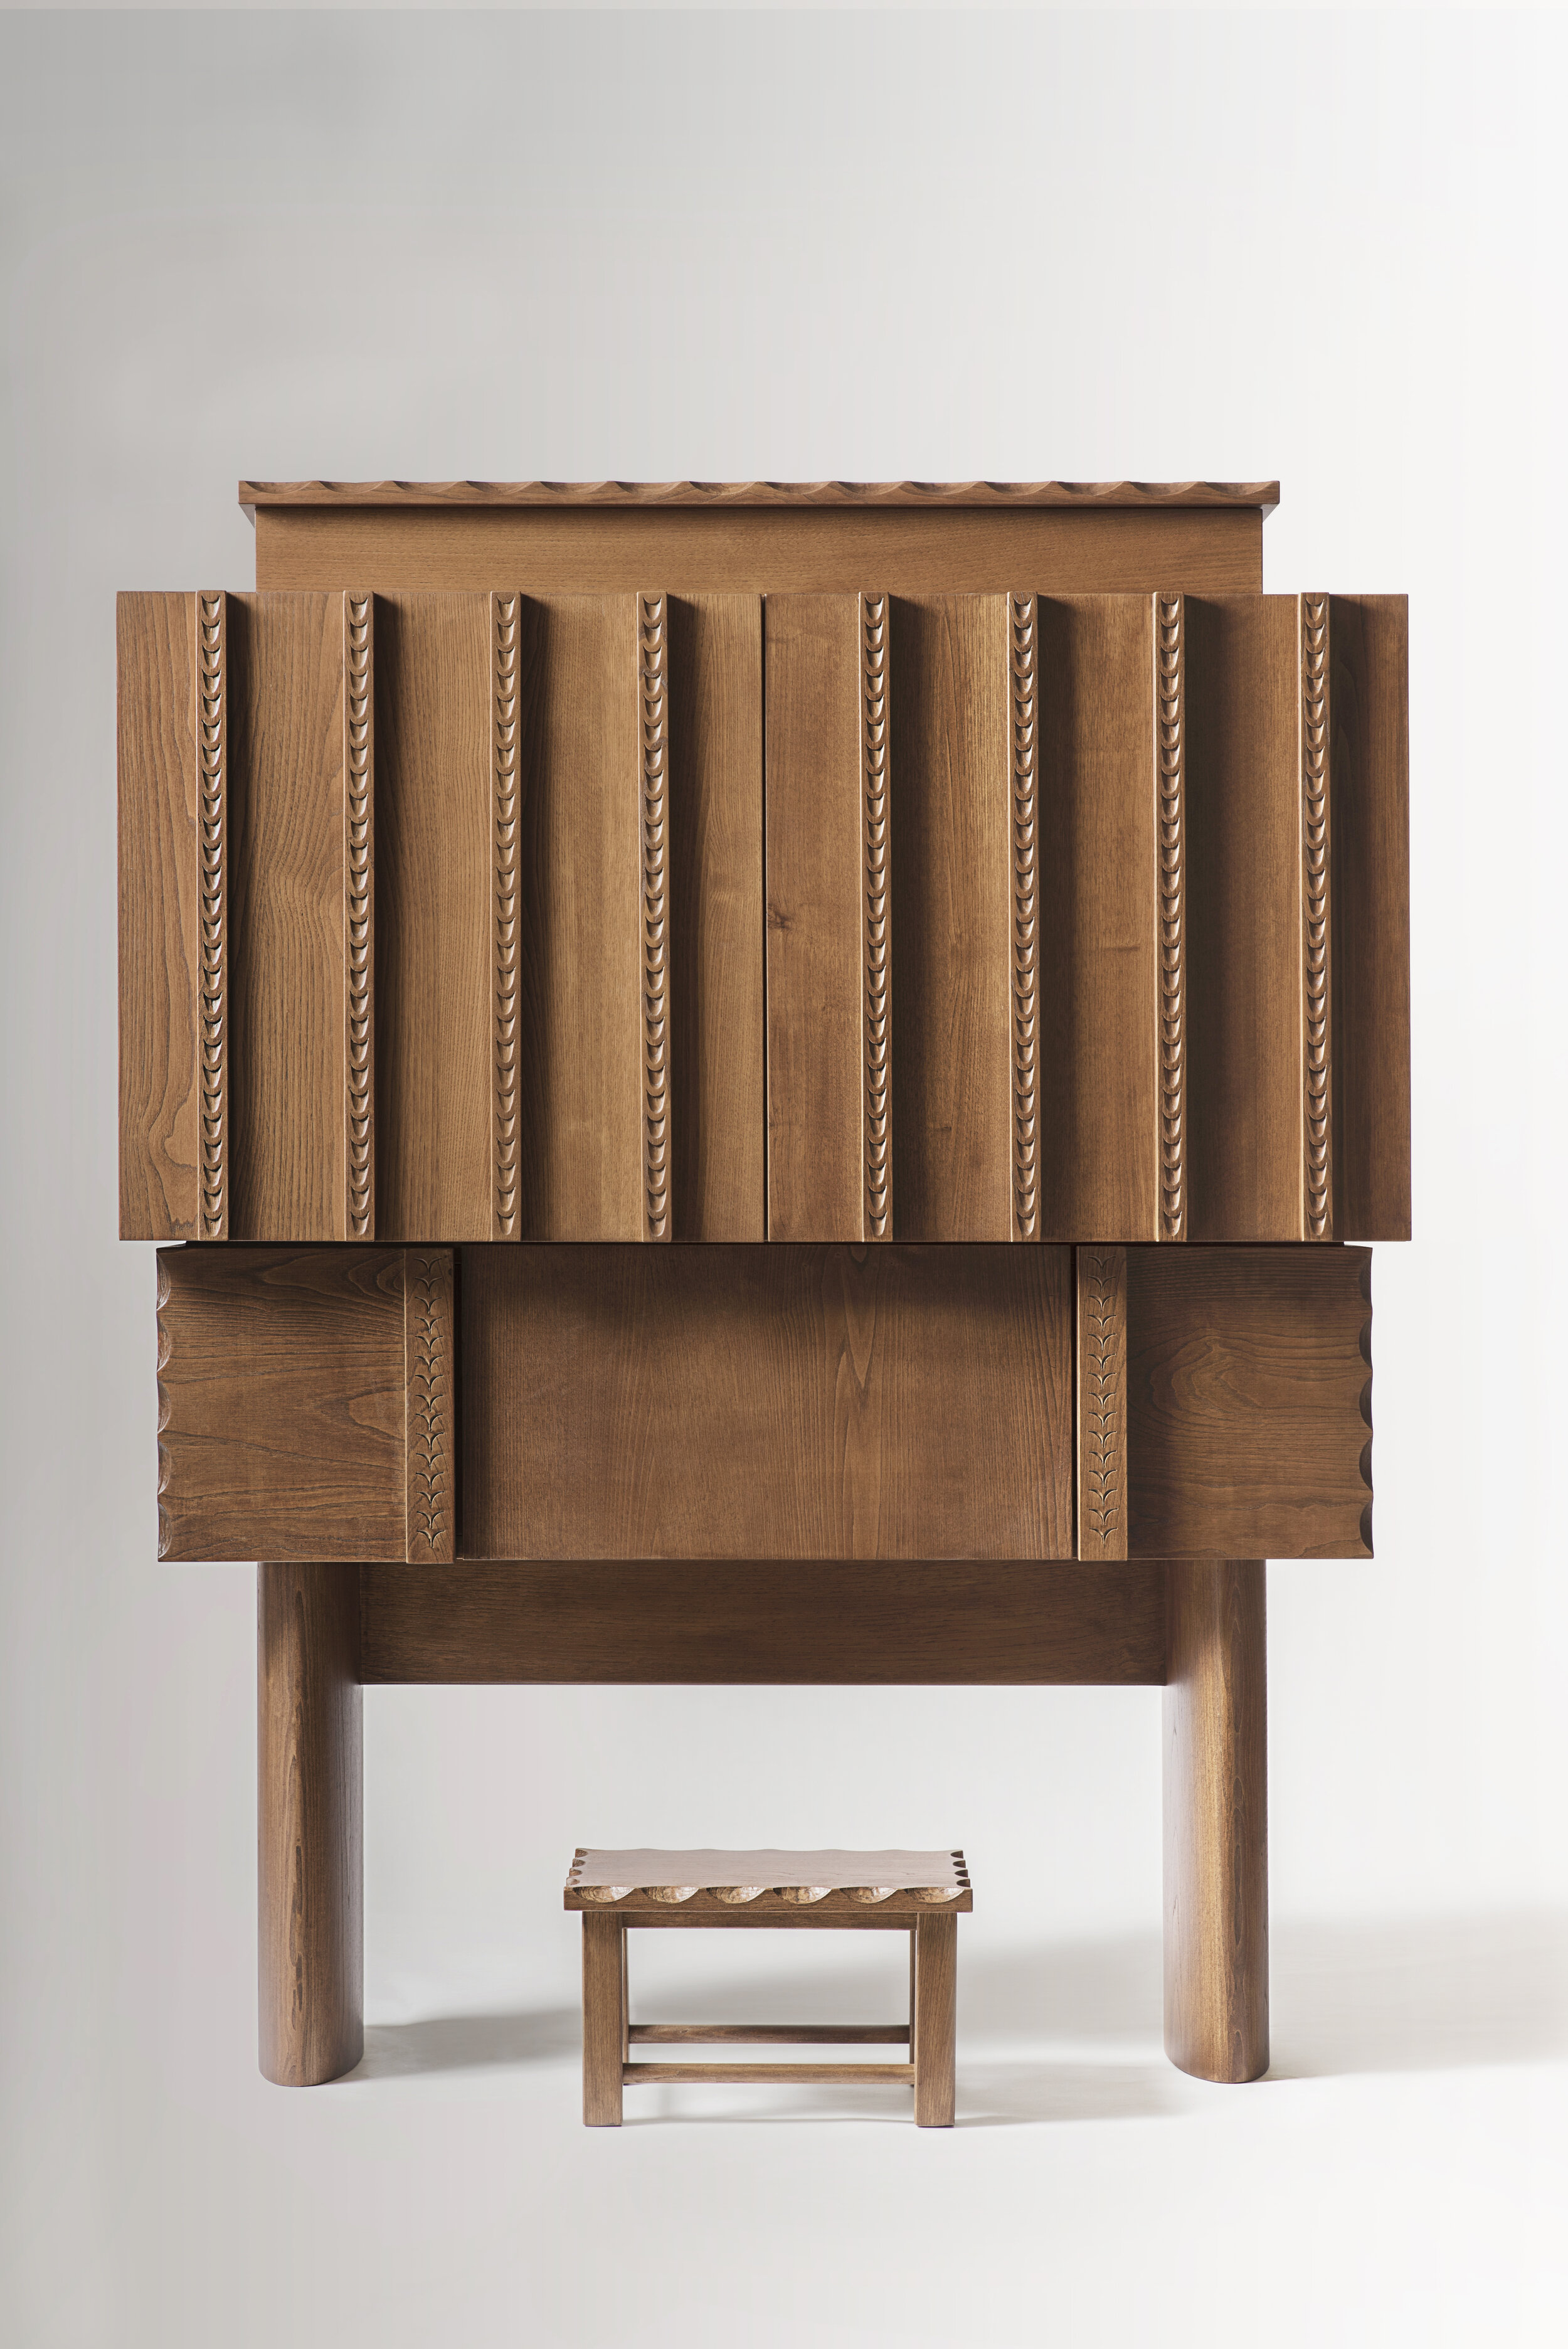 Ancas Sideboard, designed by Chiara Andreatti, made by Pierpaolo Mandis for Pretziada_with stool.jpg